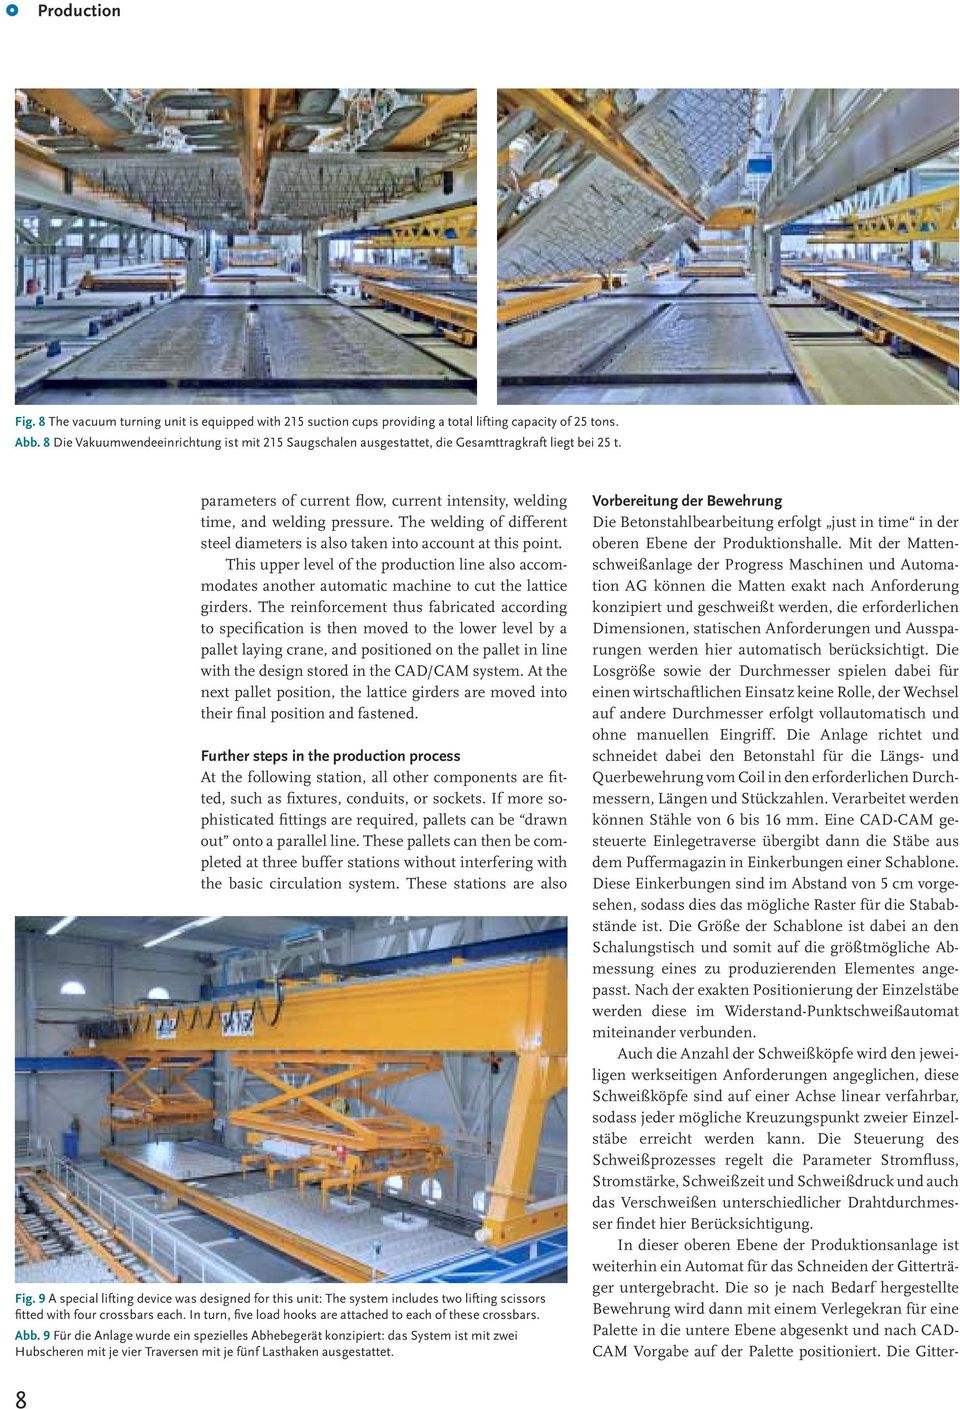 The welding of different steel diameters is also taken into account at this point. This upper level of the production line also accommodates another automatic machine to cut the lattice girders.